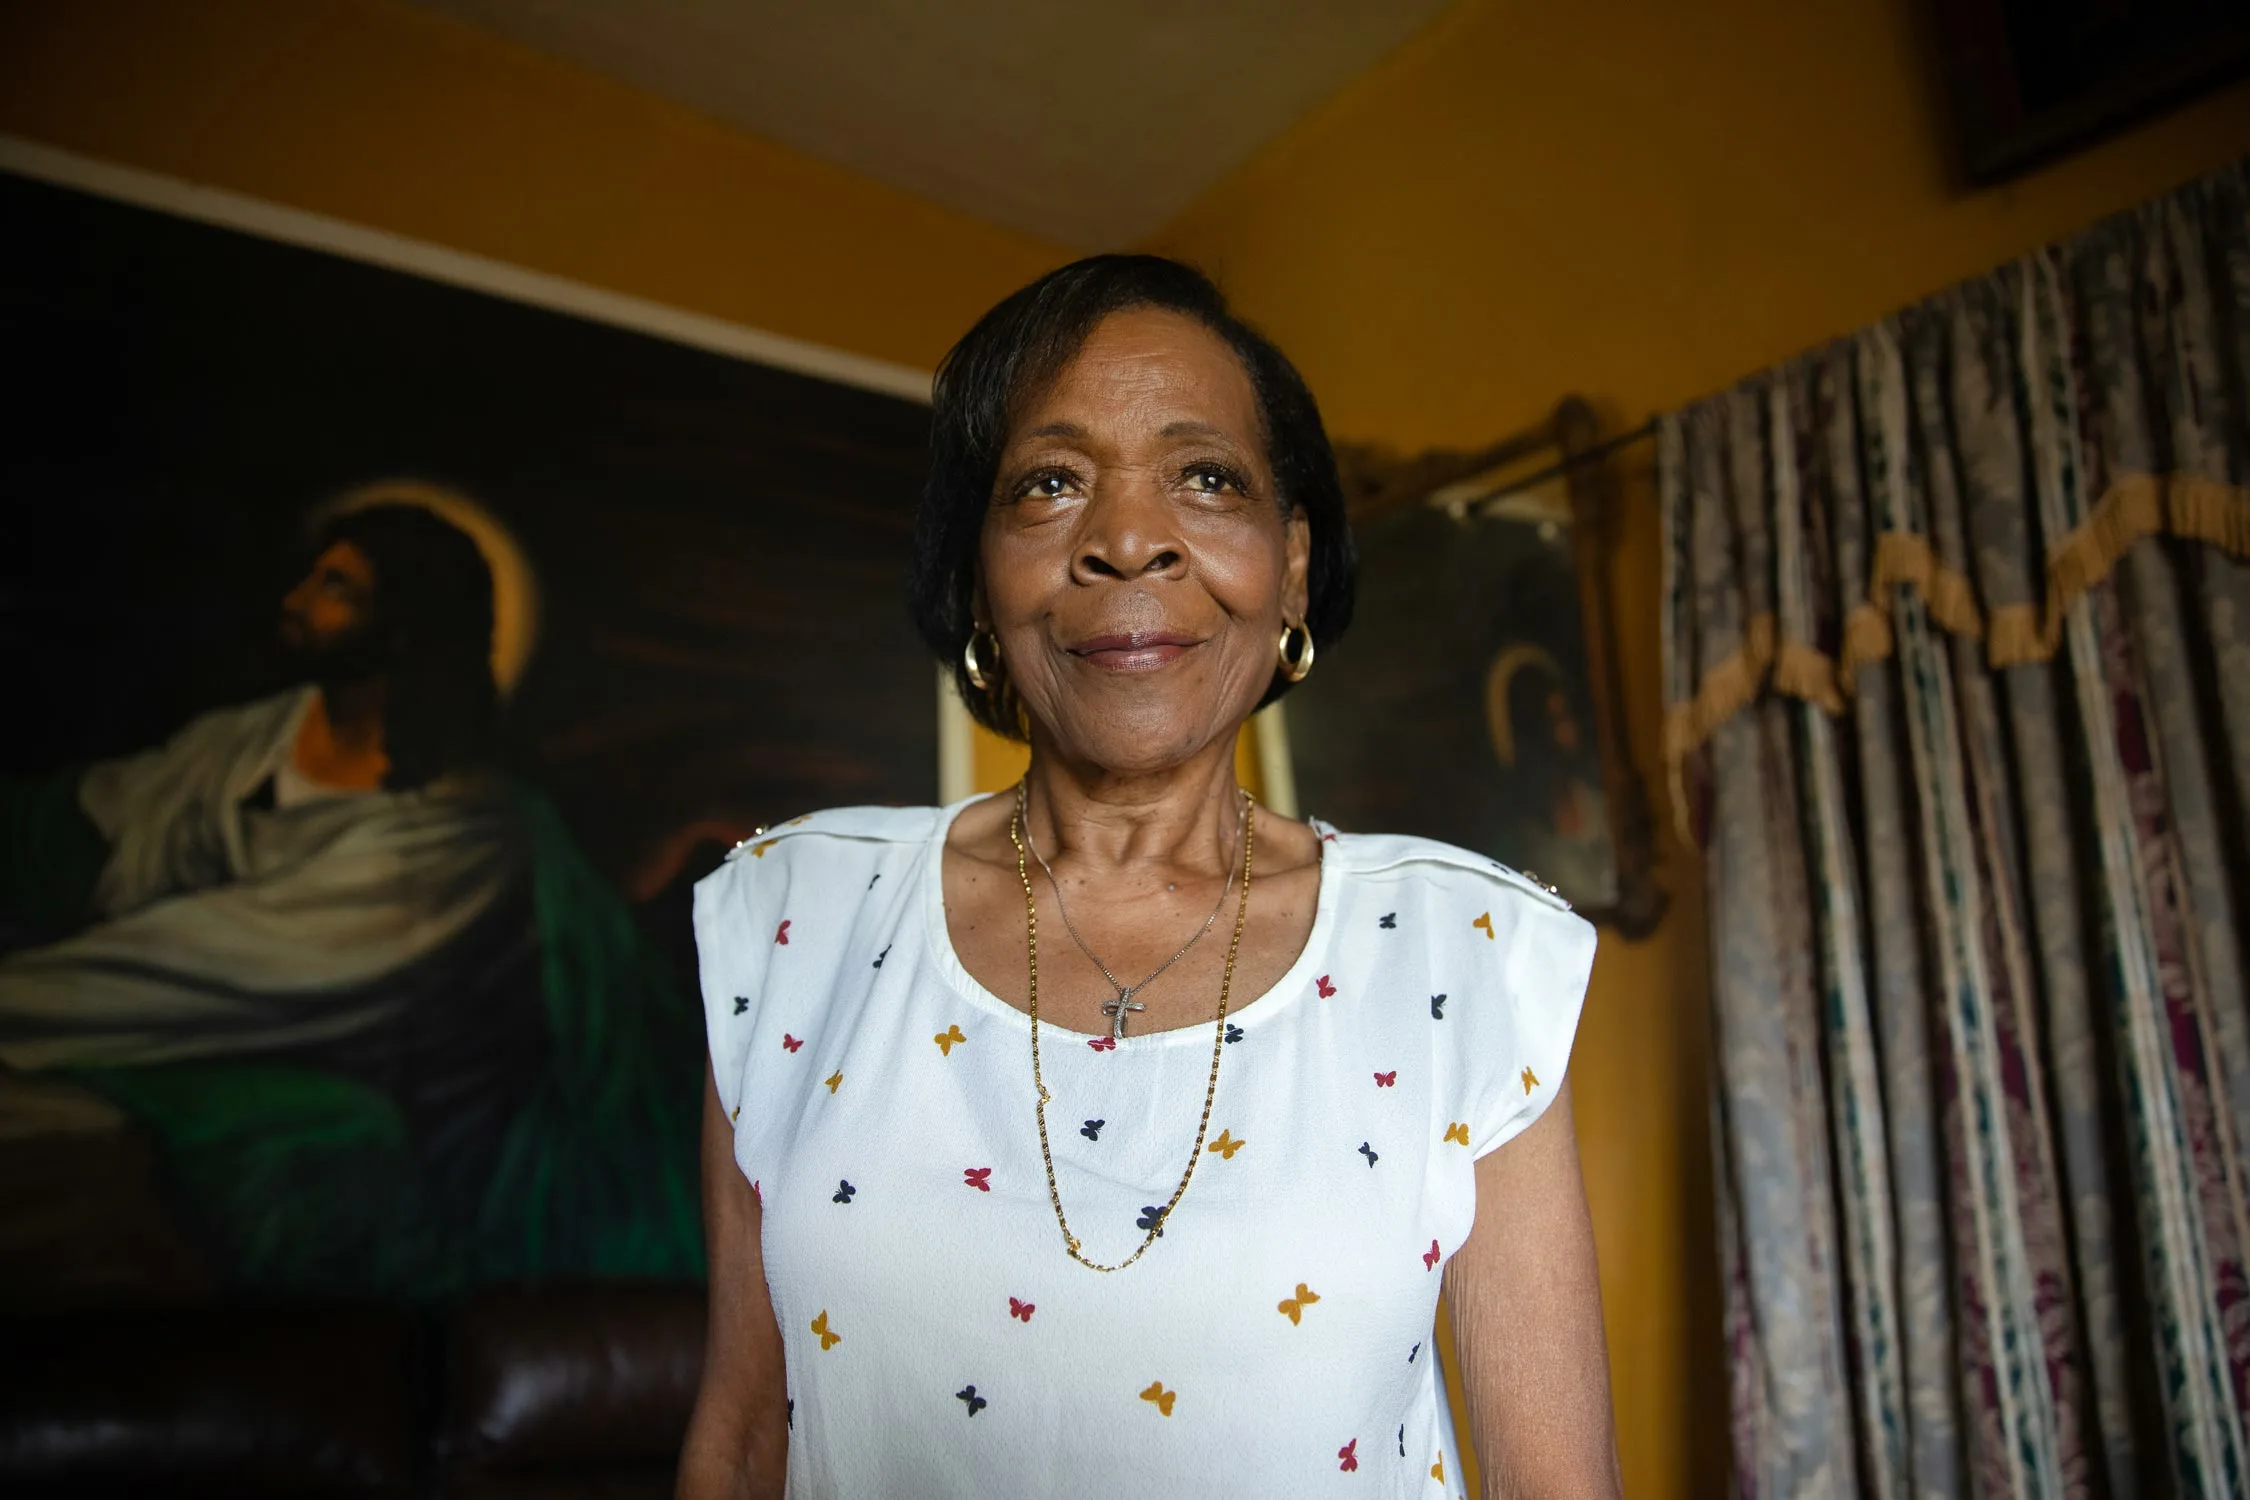 Sandra Reed, mother of Rodney Reed who remains on death row for a crime he didn't commit, in her home on Texas in May 2023. (Image: Montinique Monroe/Innocence Project)